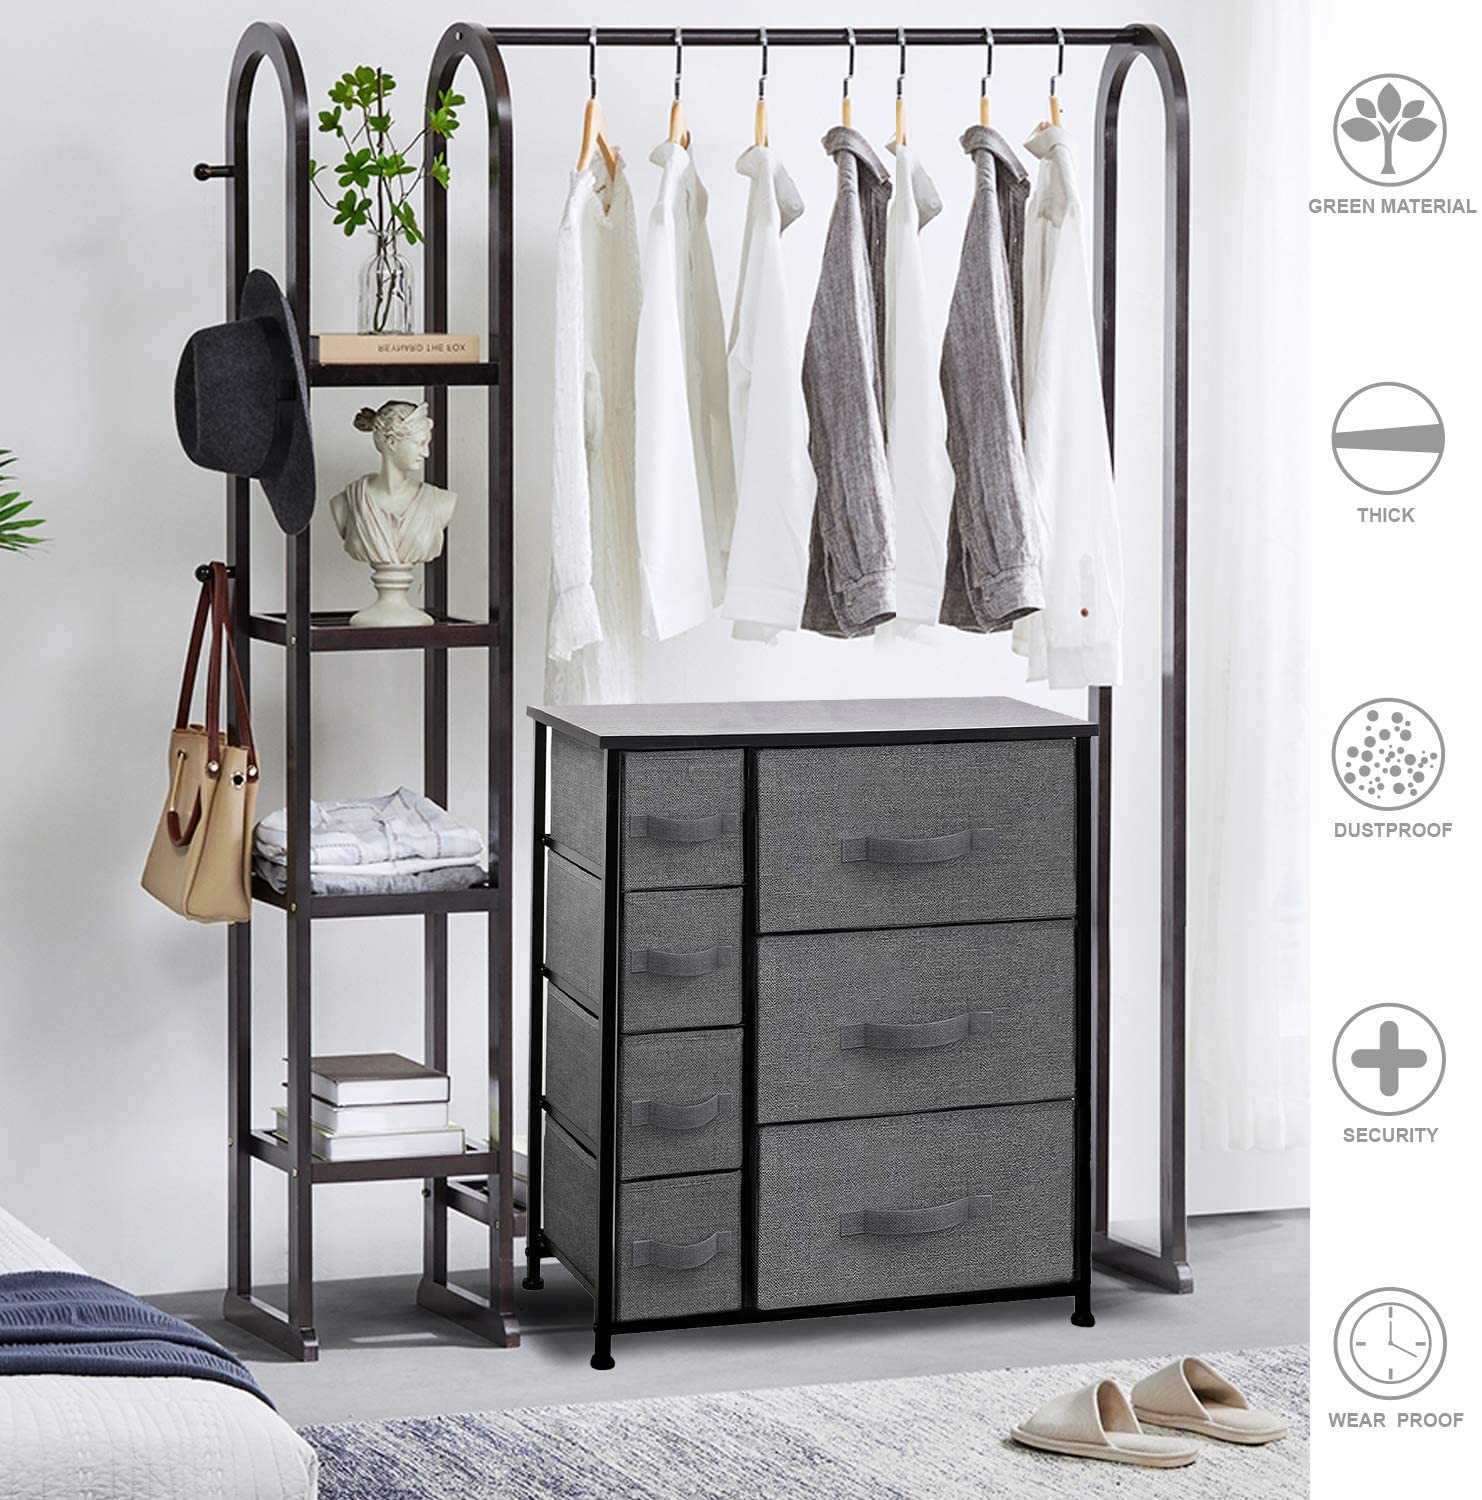 CERBIOR Drawer Dresser Closet Storage Organizer 7-Drawer Closet Shelves,  Sturdy Steel Frame Wood Top with Easy Pull Fabric Bins for Clothing,  Blankets